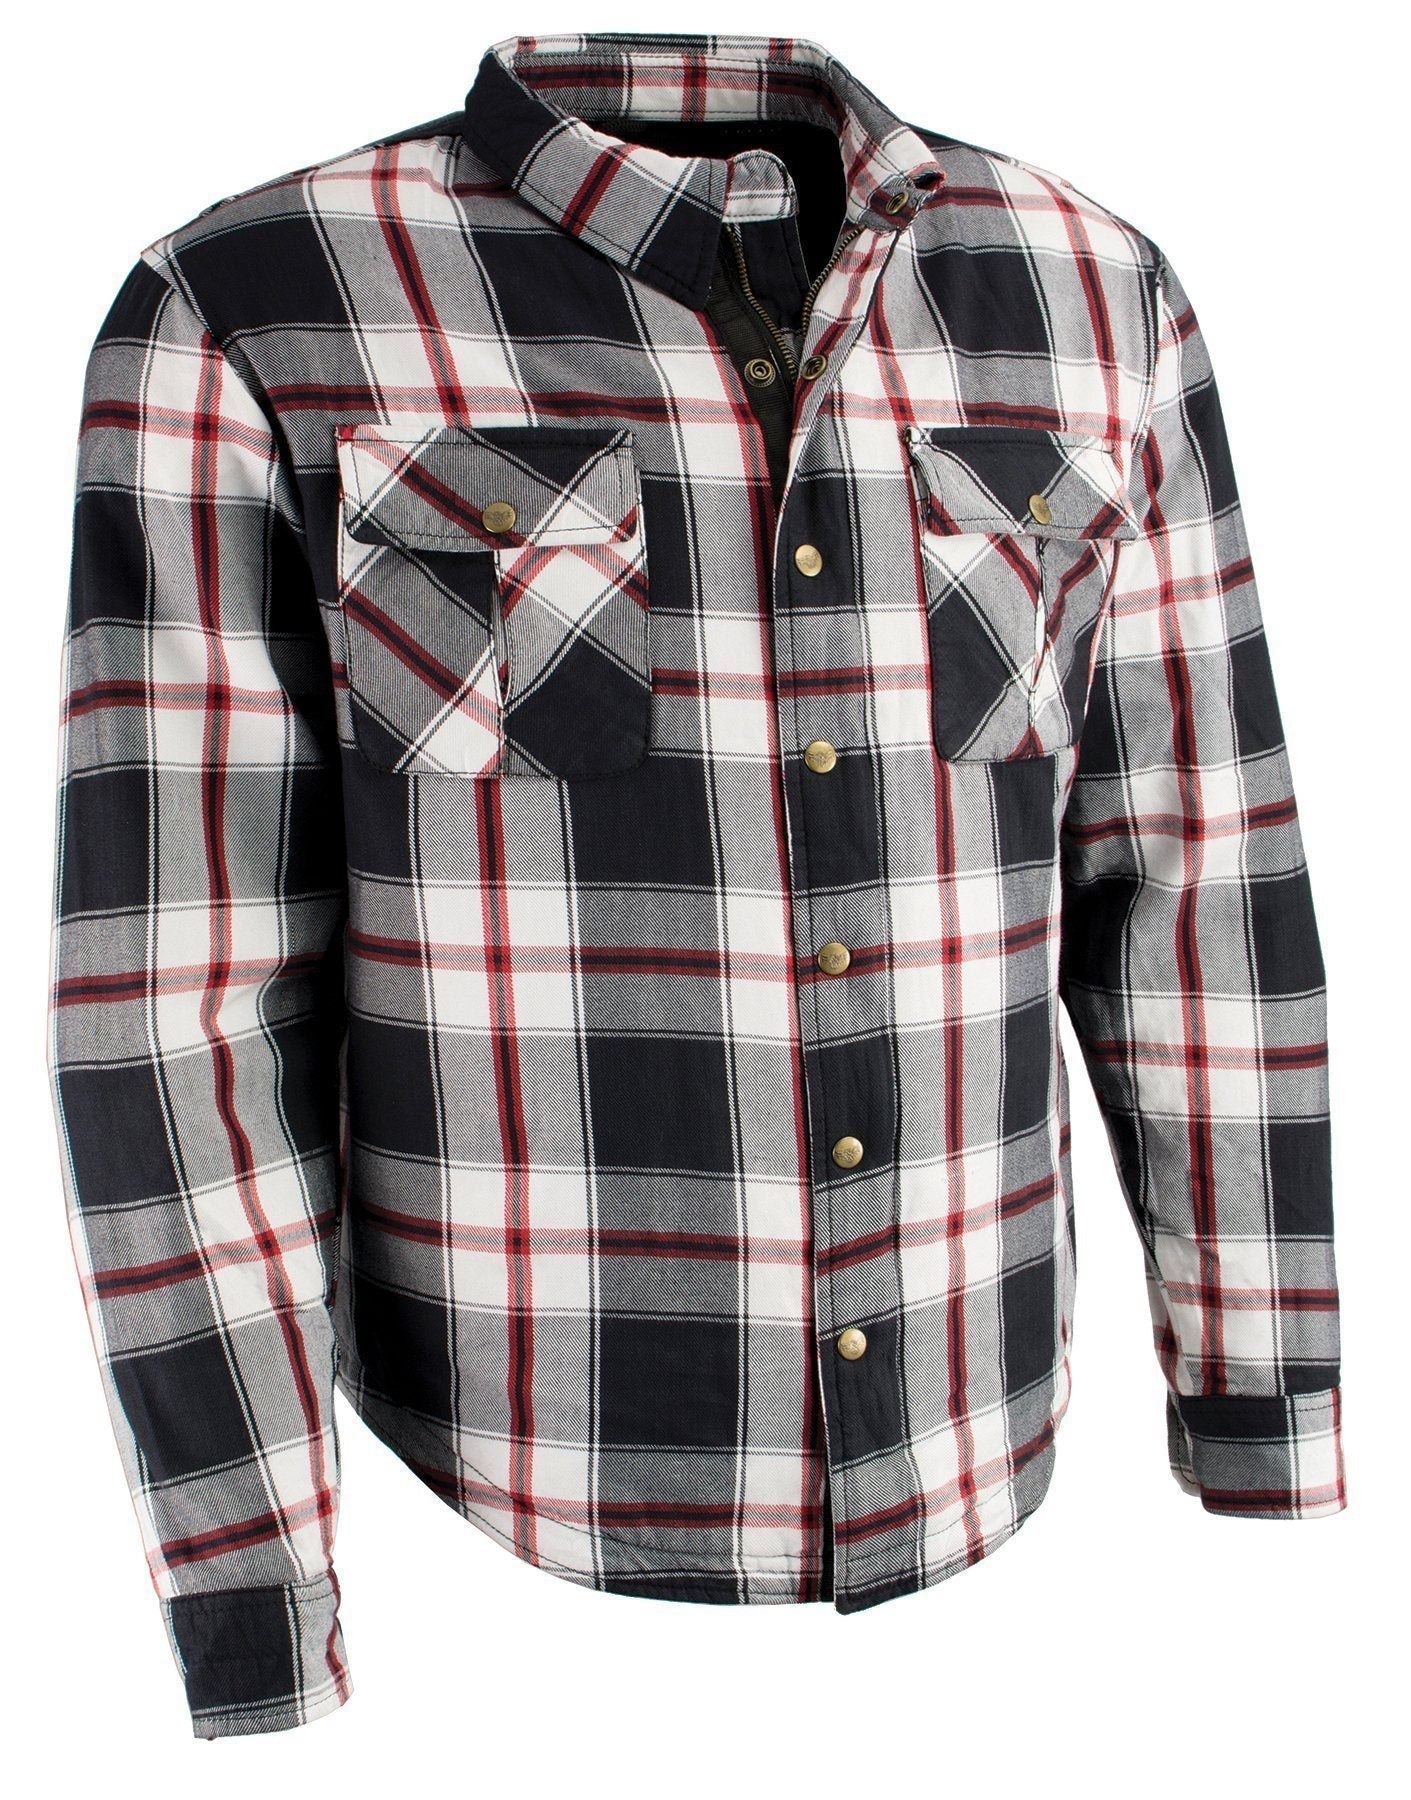 Milwaukee Leather MPM1625 Men's Plaid Flannel Biker Shirt with CE Approved Armor - Reinforced w/ Aramid Fibers